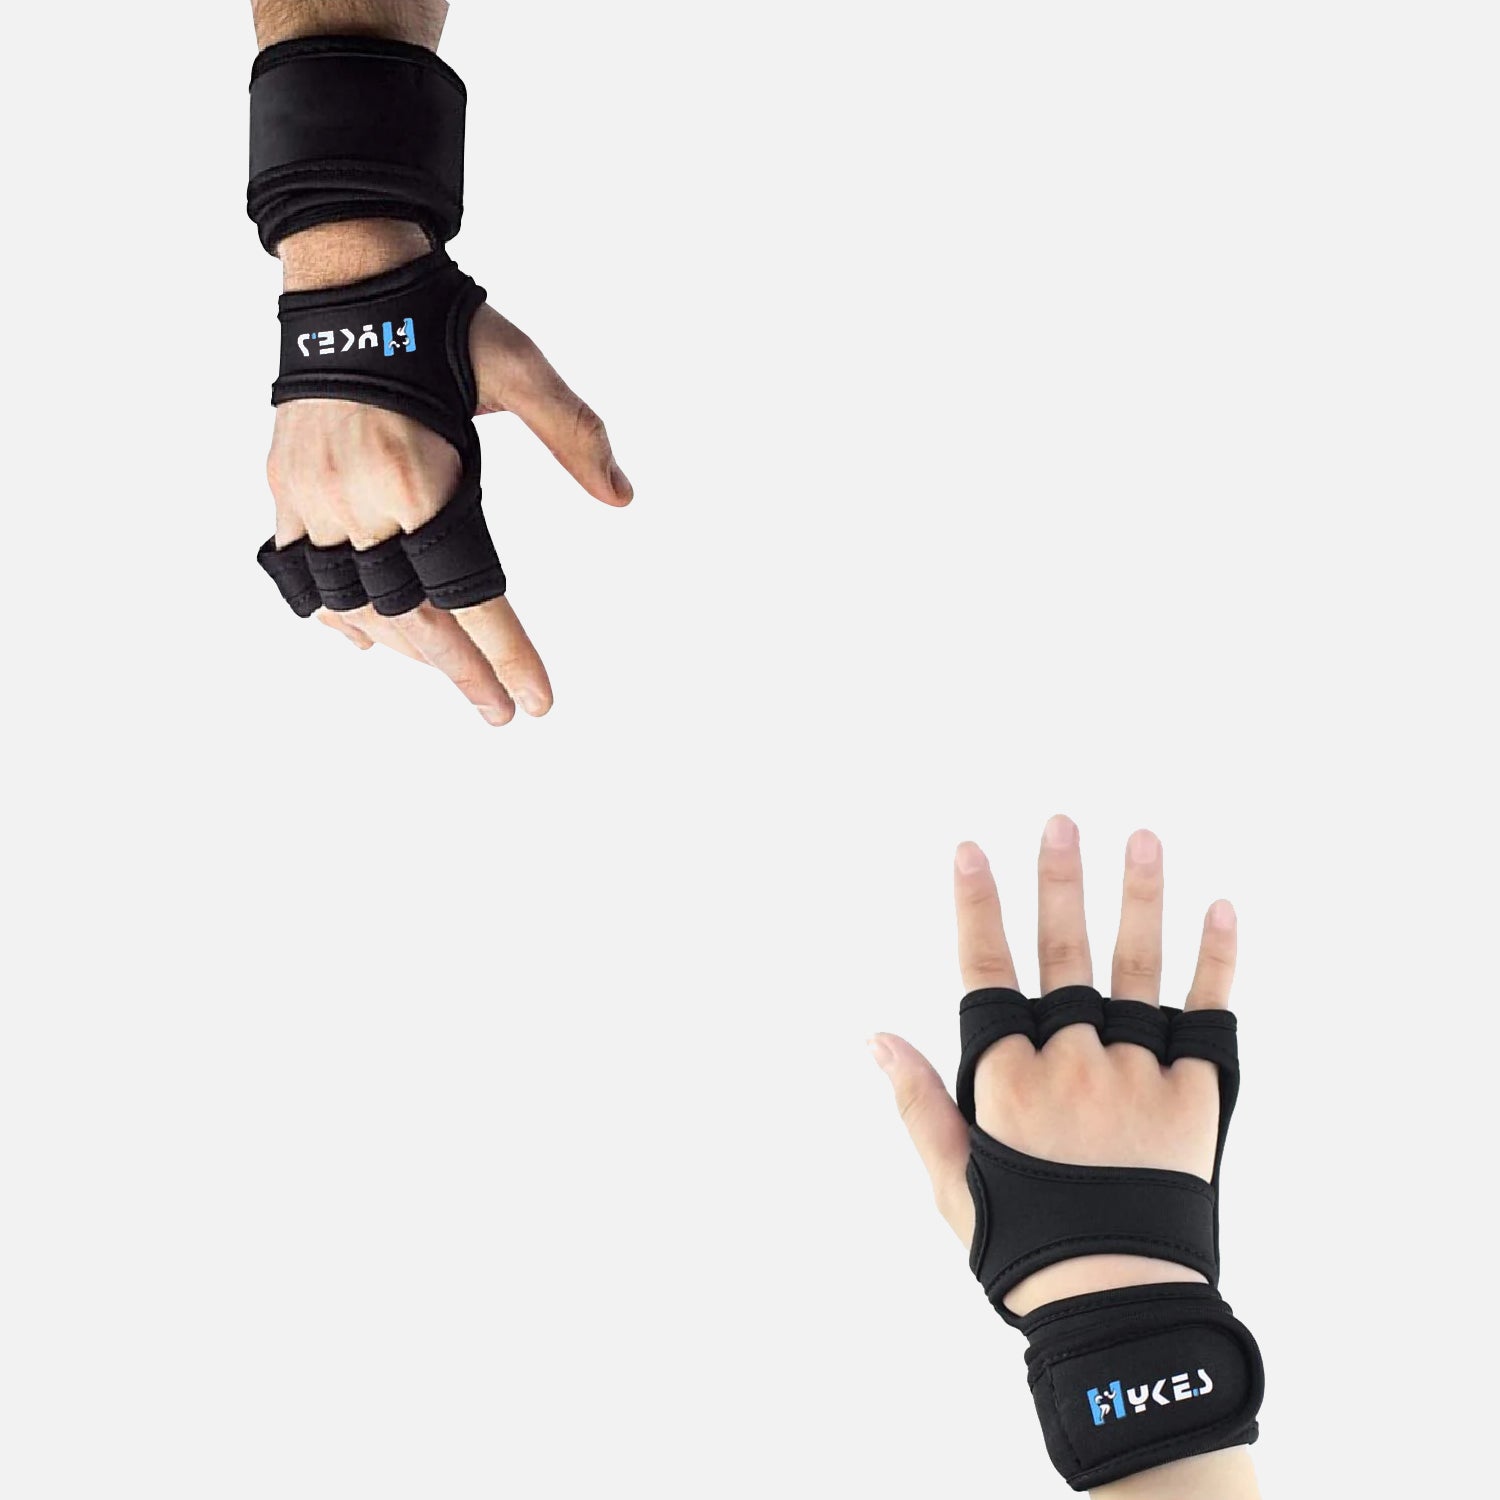 http://hykes.in/cdn/shop/files/hykes-gloves-weight-lifting-hand-grips-for-pull-ups-gym-workout-crossfit-exercise-02.jpg?v=1702991026